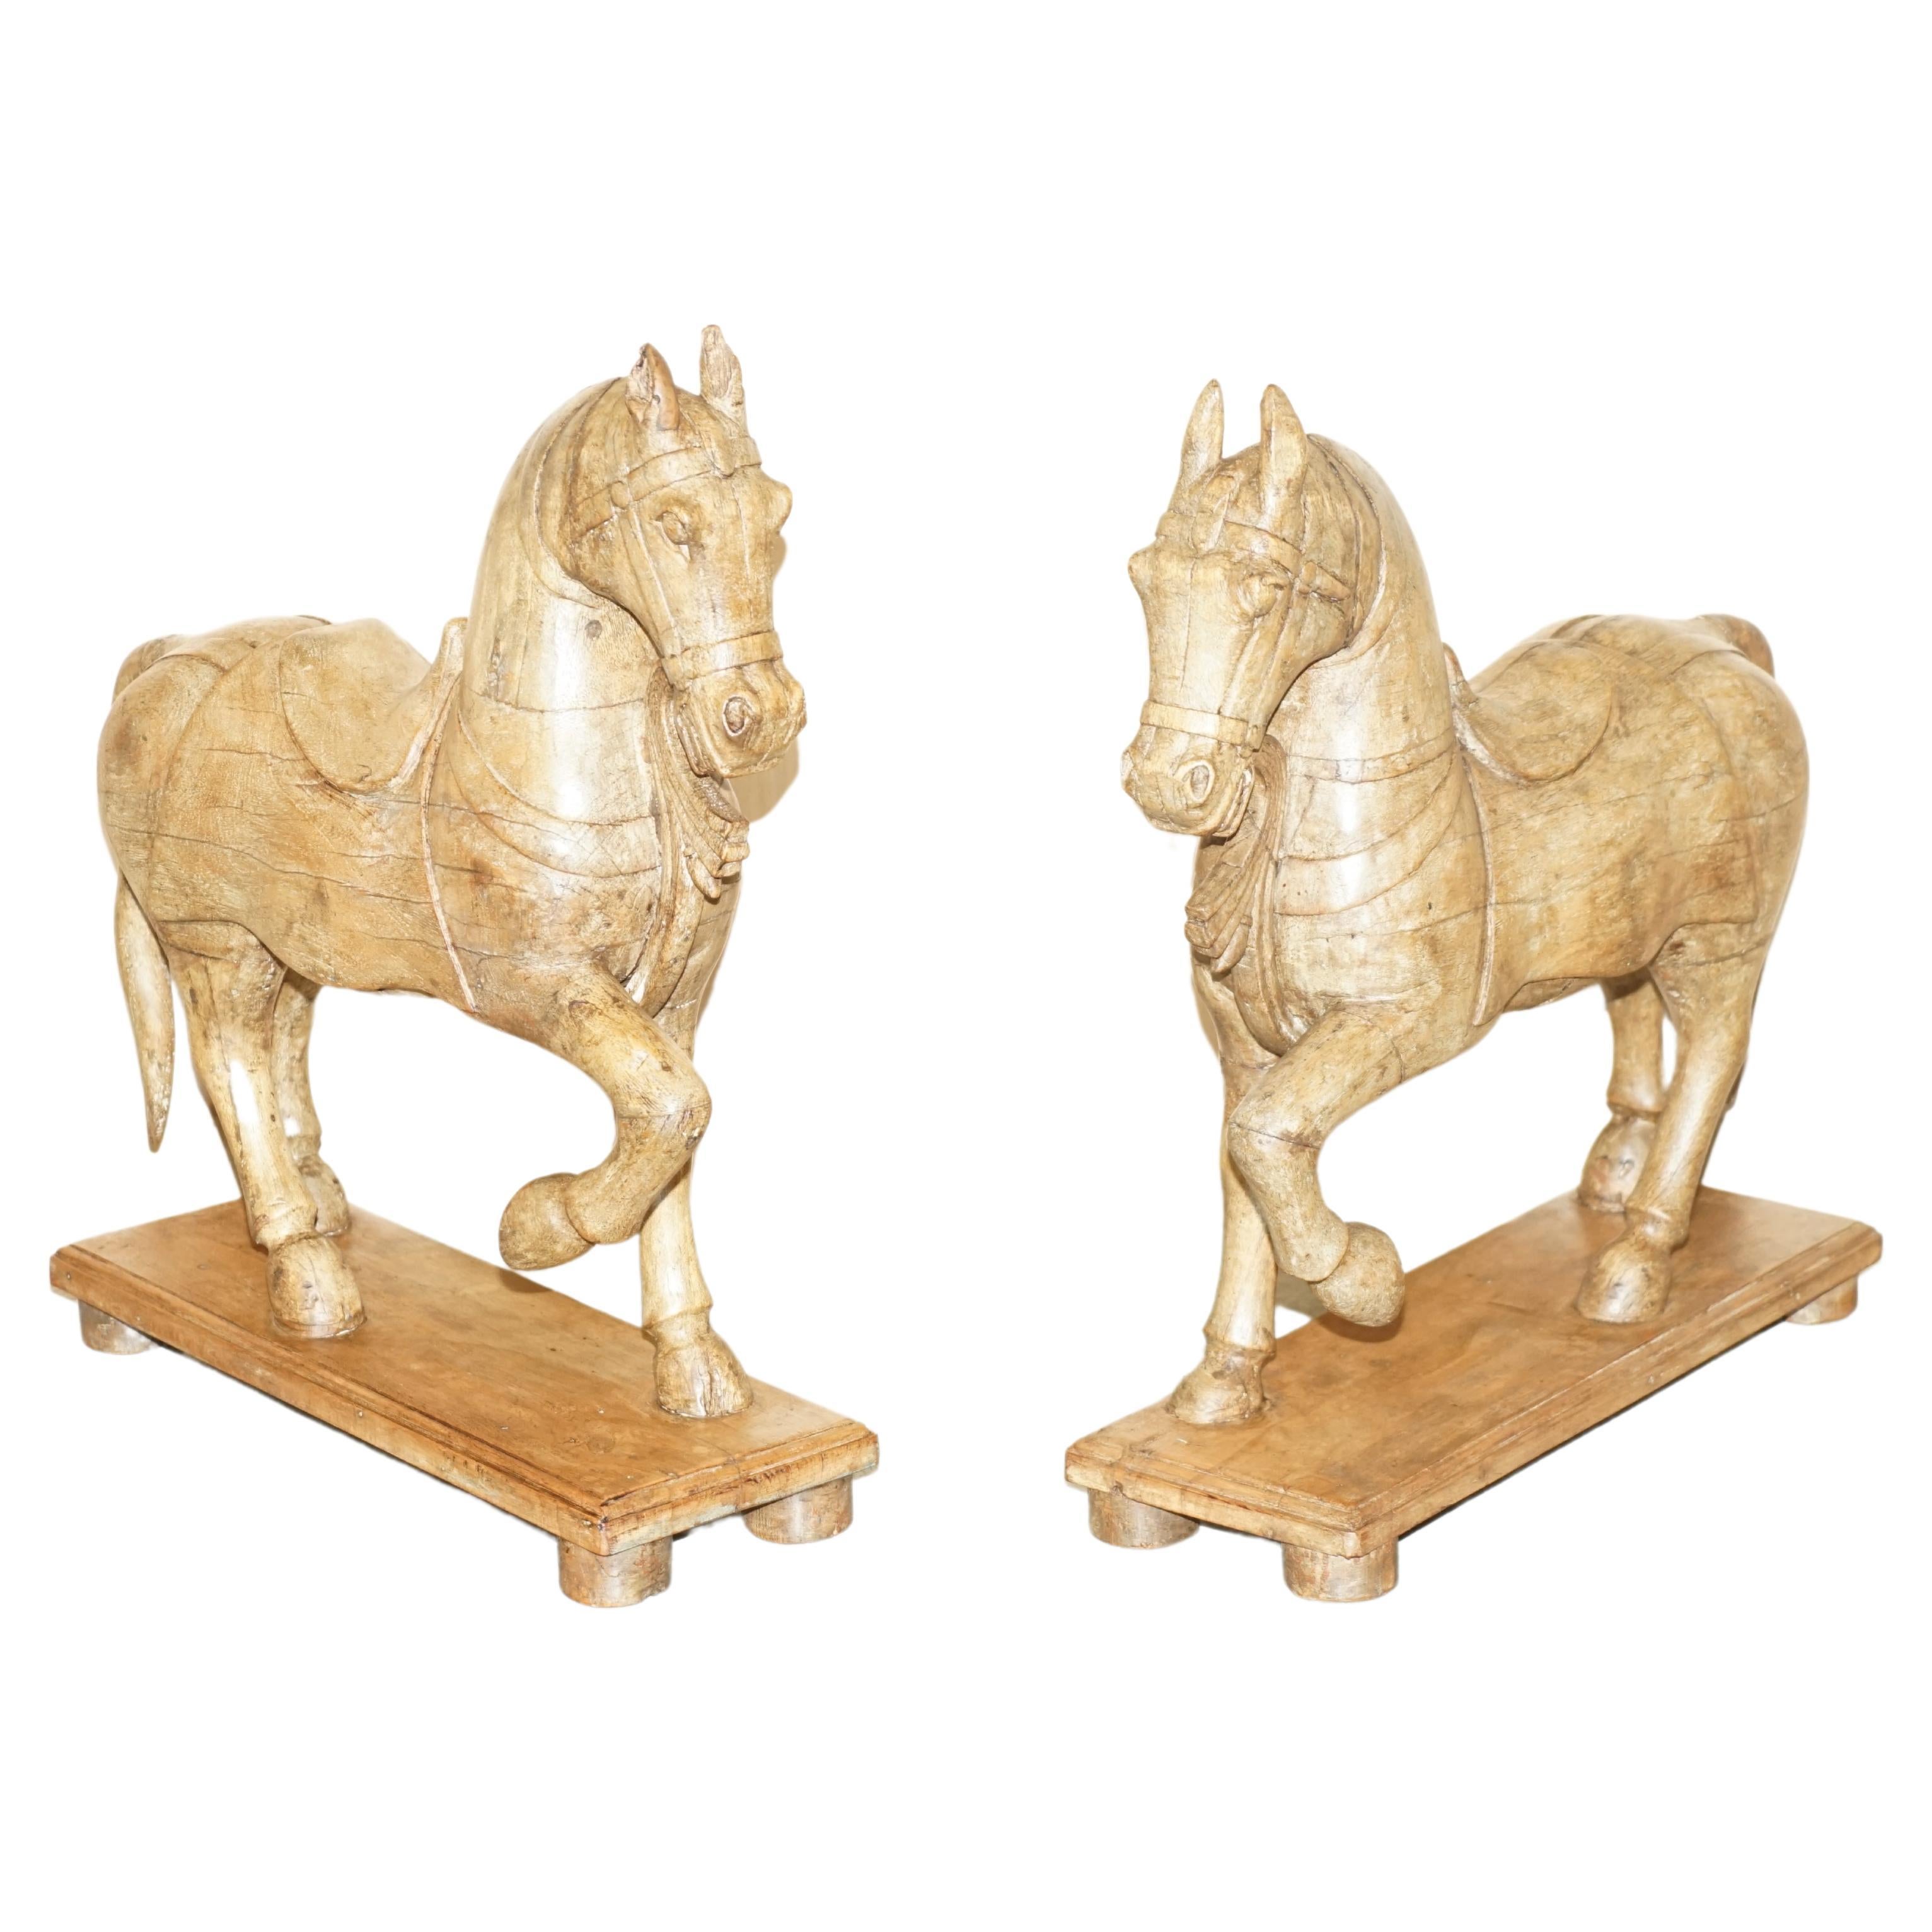 Pair of Decorative Antique Hand Carved Wooden Statues of a Lovely Horses